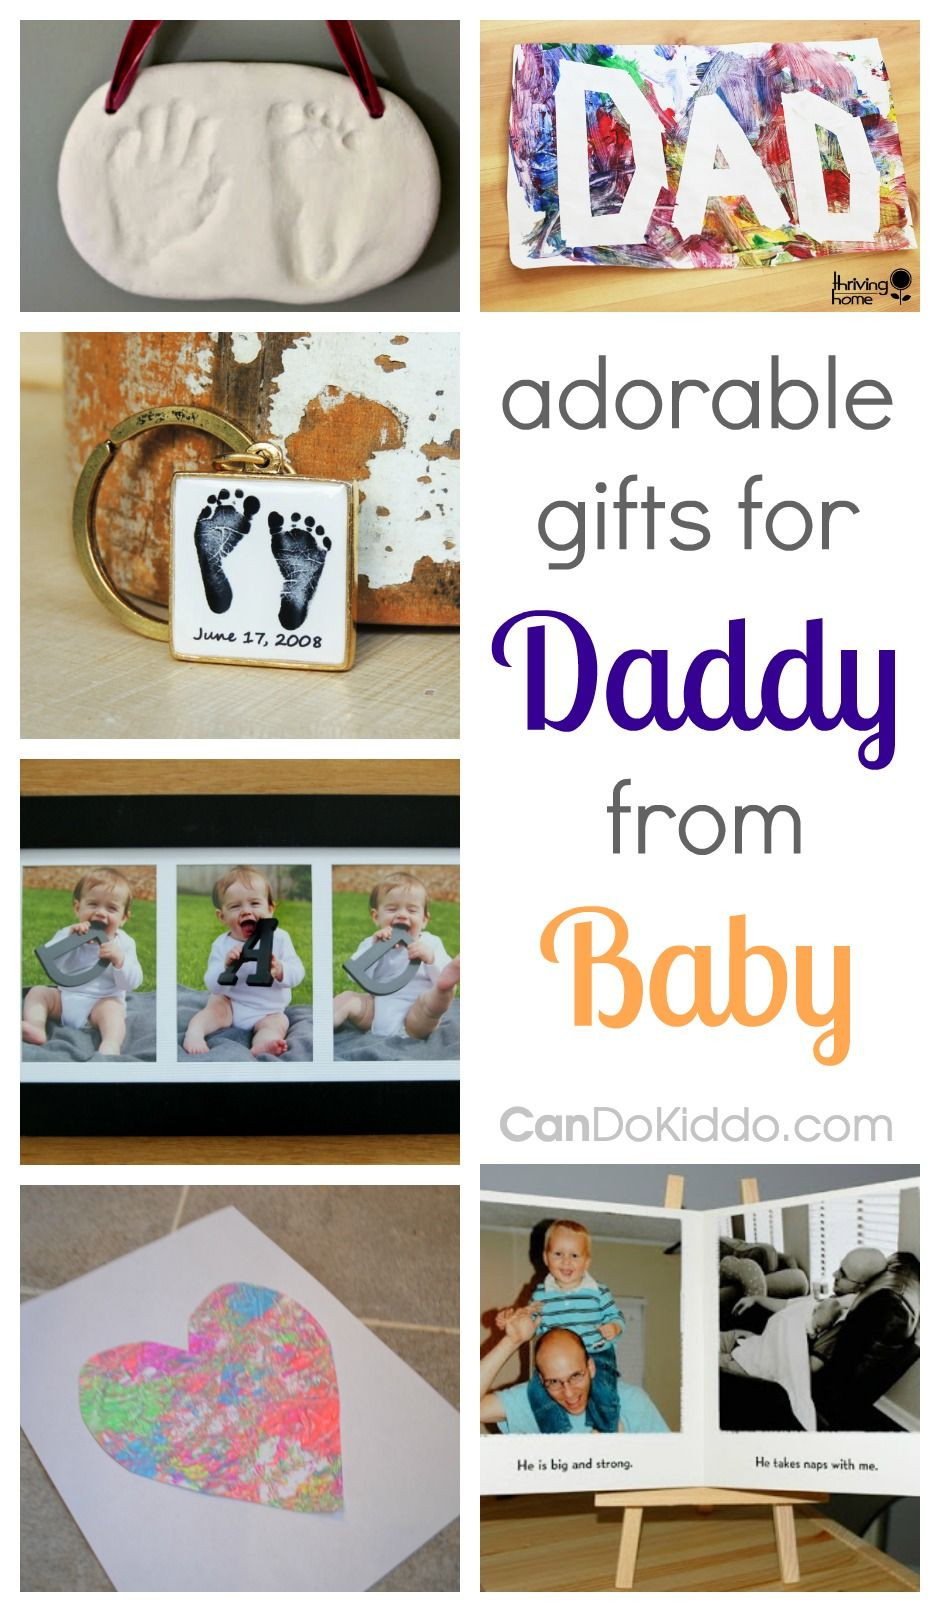 DIY Birthday Gifts For Dad
 Best 25 Gifts for daddy ideas on Pinterest